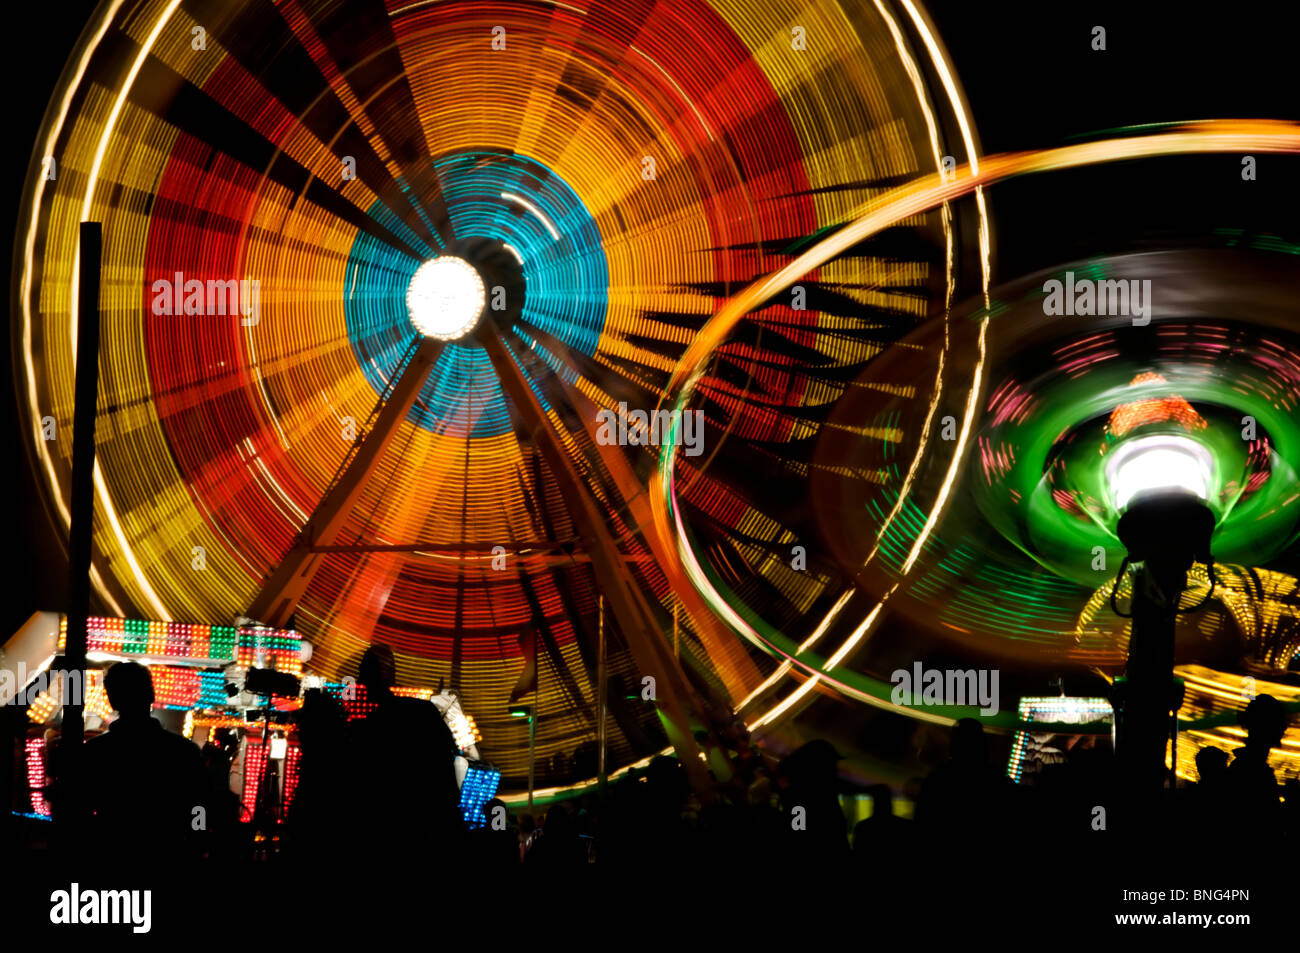 Amusement Park Rides Spin And Turn Displaying Bright Colors On A Stock Photo Alamy